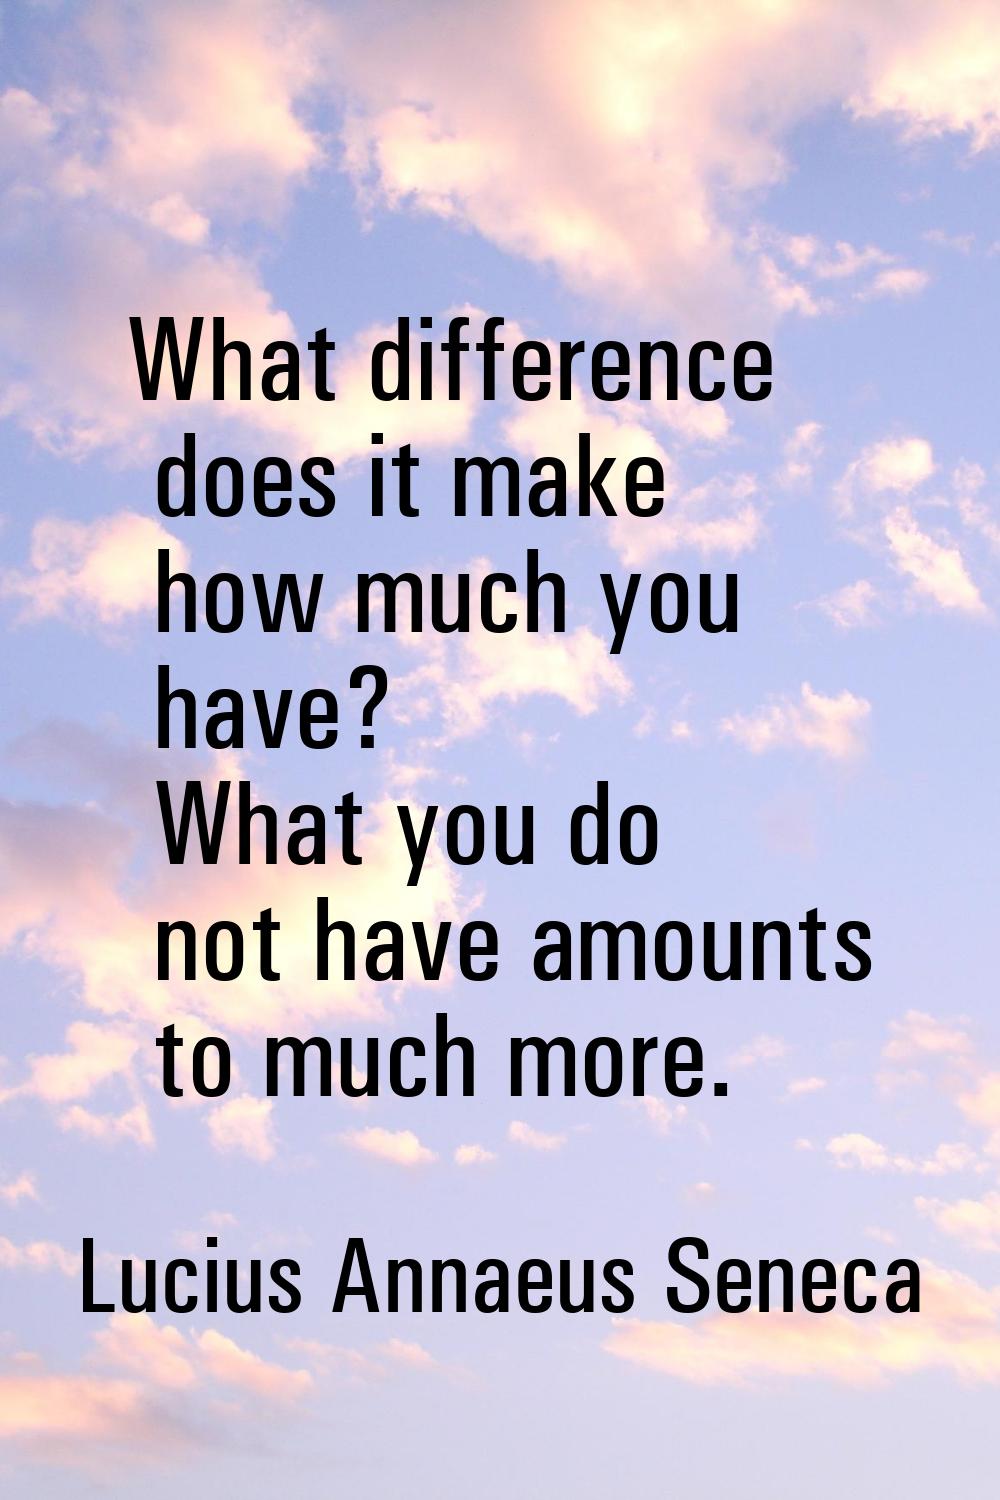 What difference does it make how much you have? What you do not have amounts to much more.